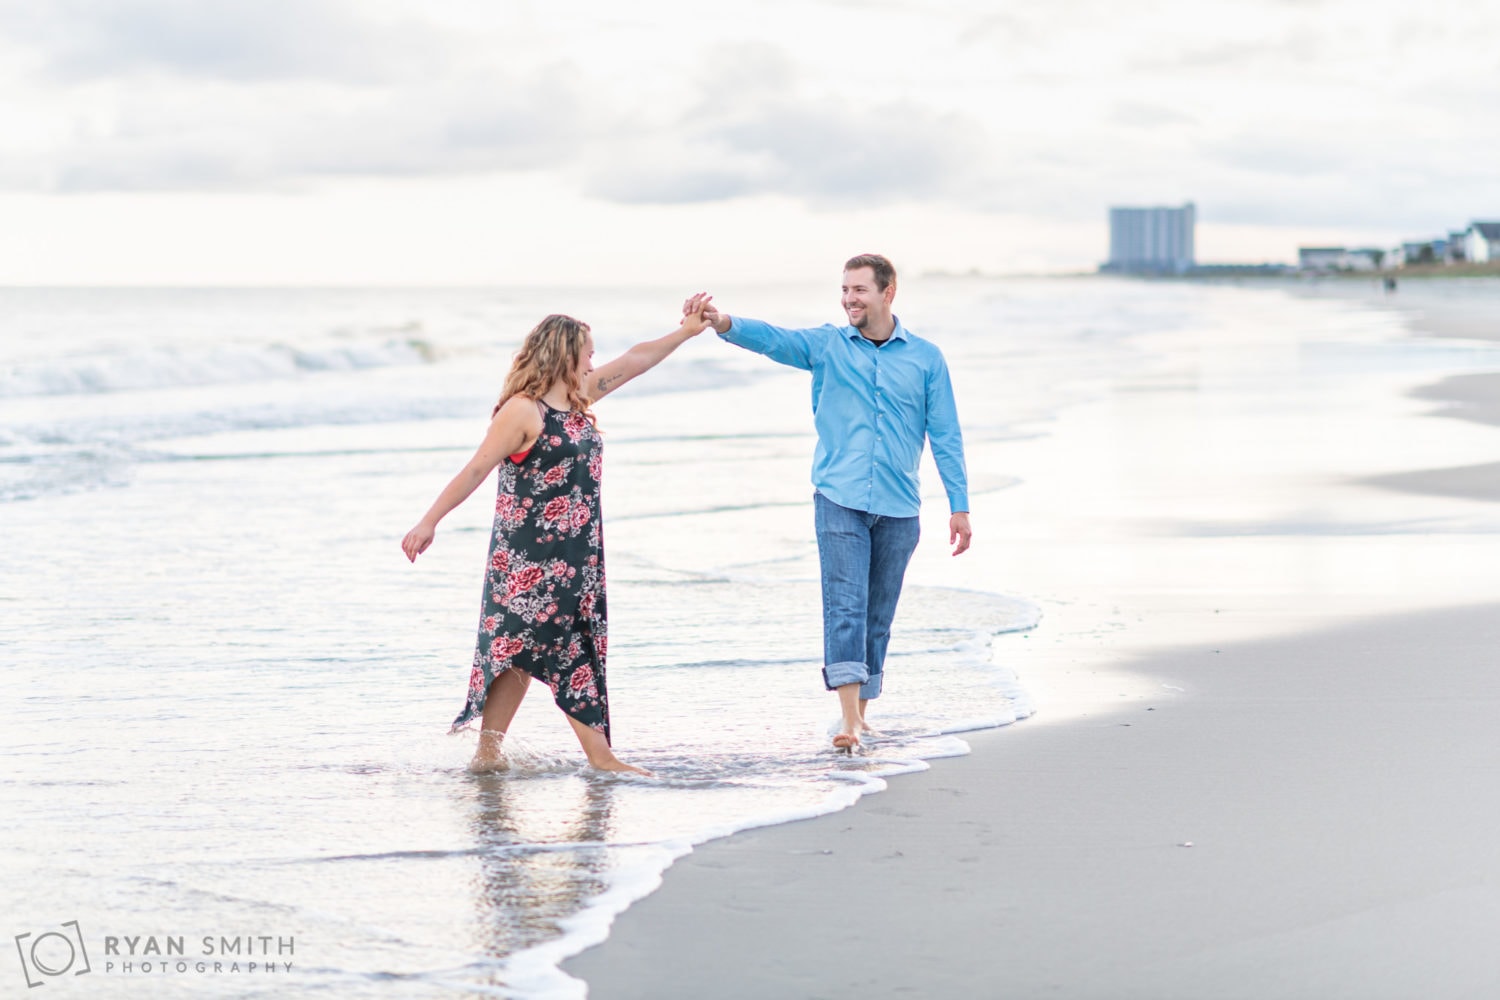 Surprise proposal on a pretty evening by the ocean - Myrtle Beach State Park